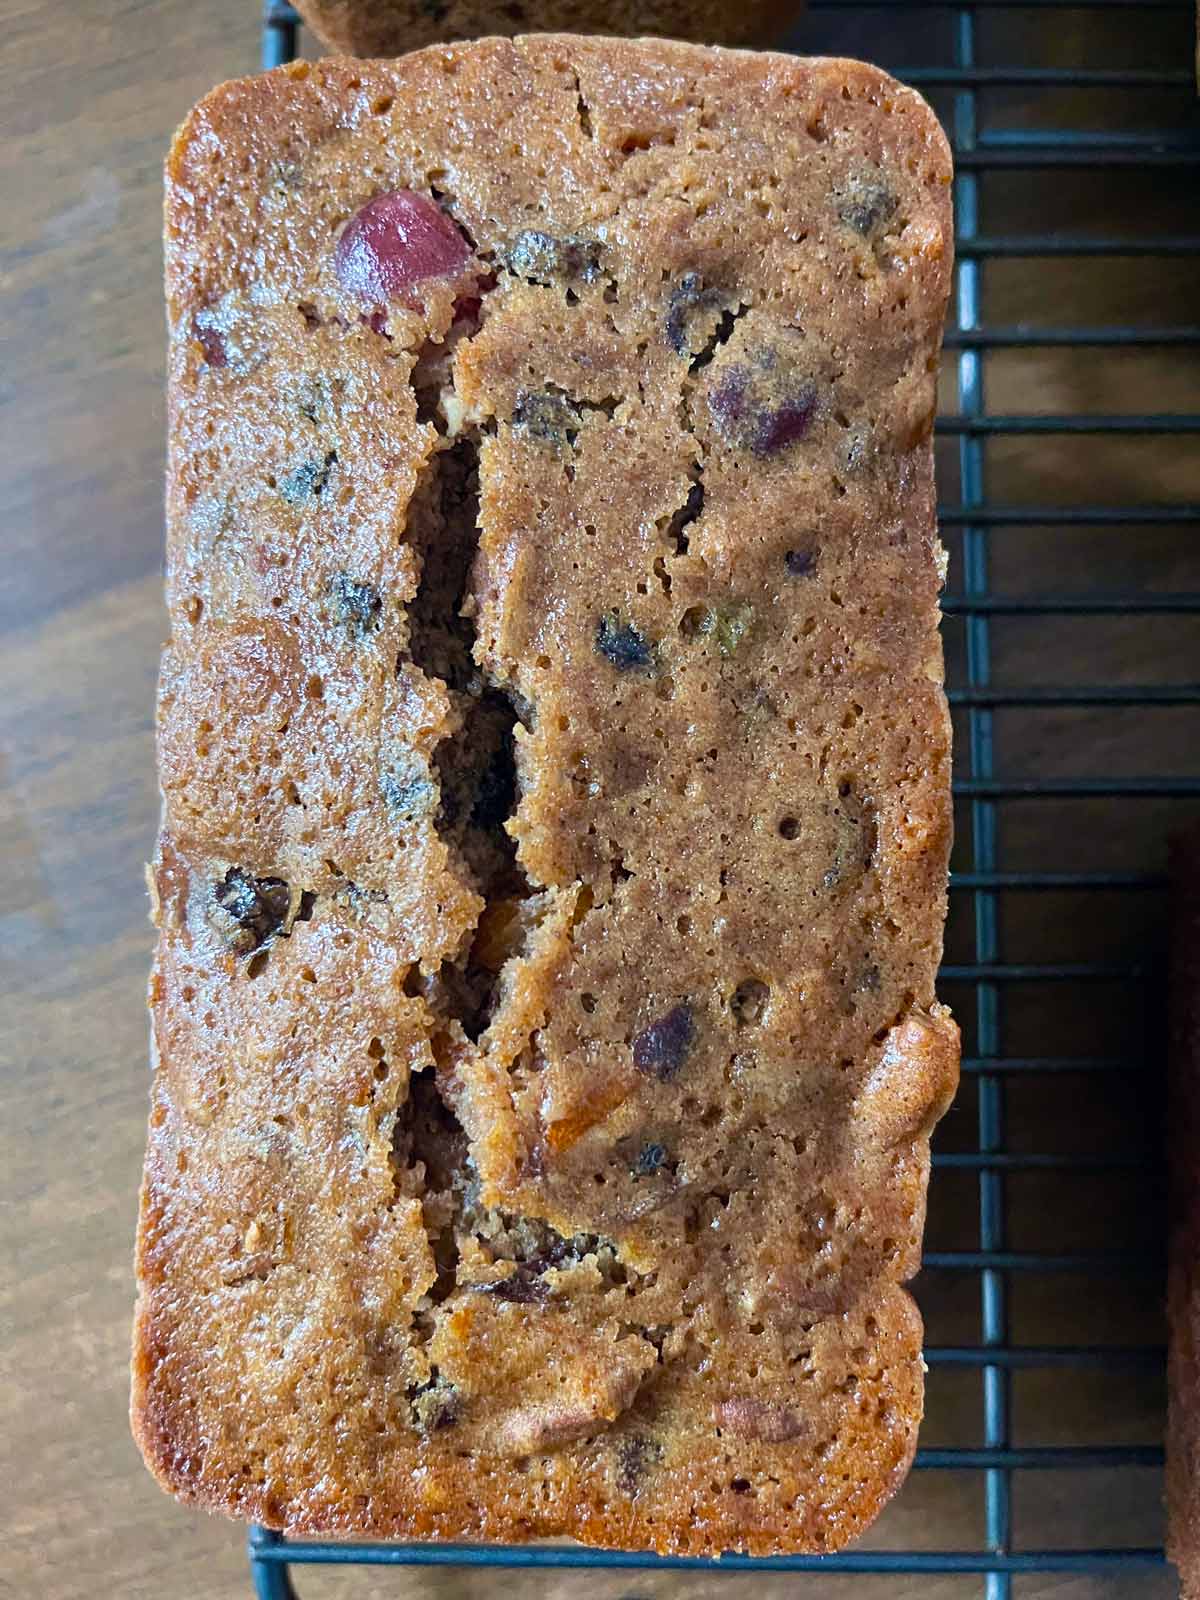 Baked fruitcake with crack across the top.